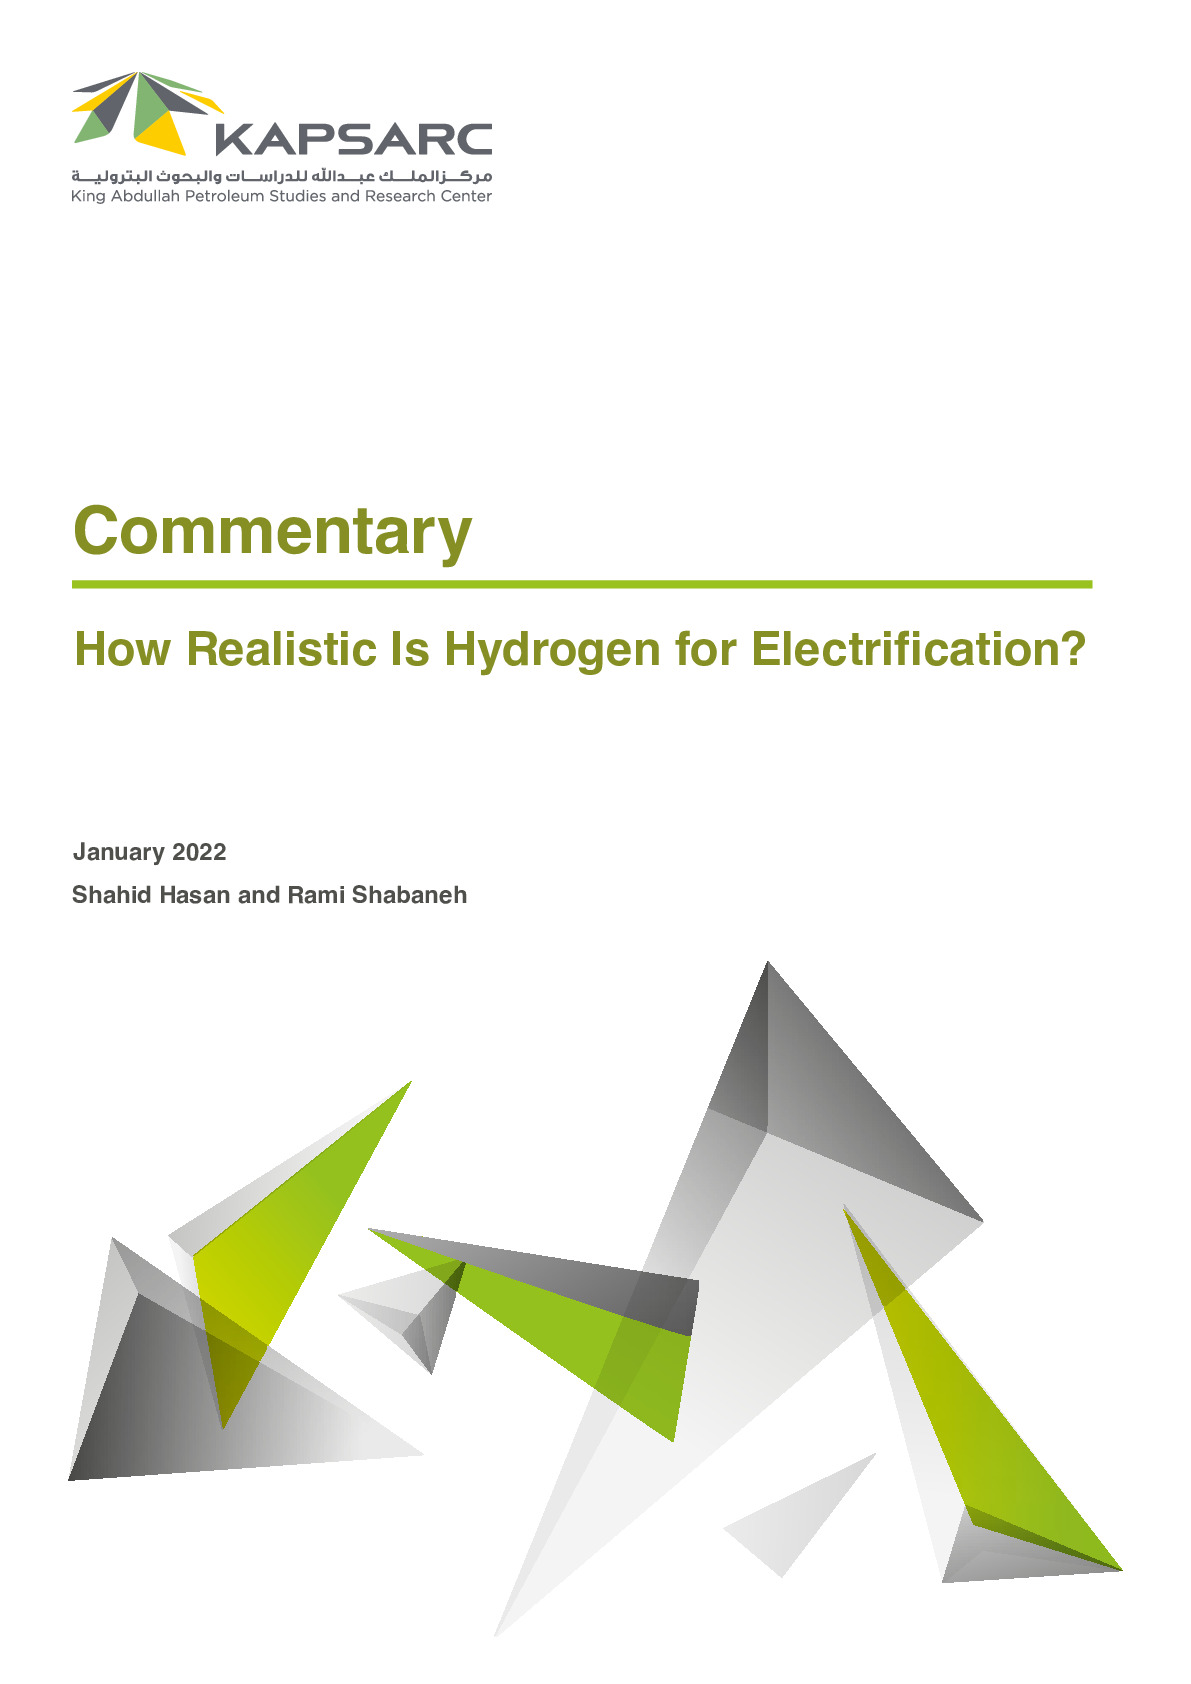 How Realistic Is Hydrogen for Electrification?